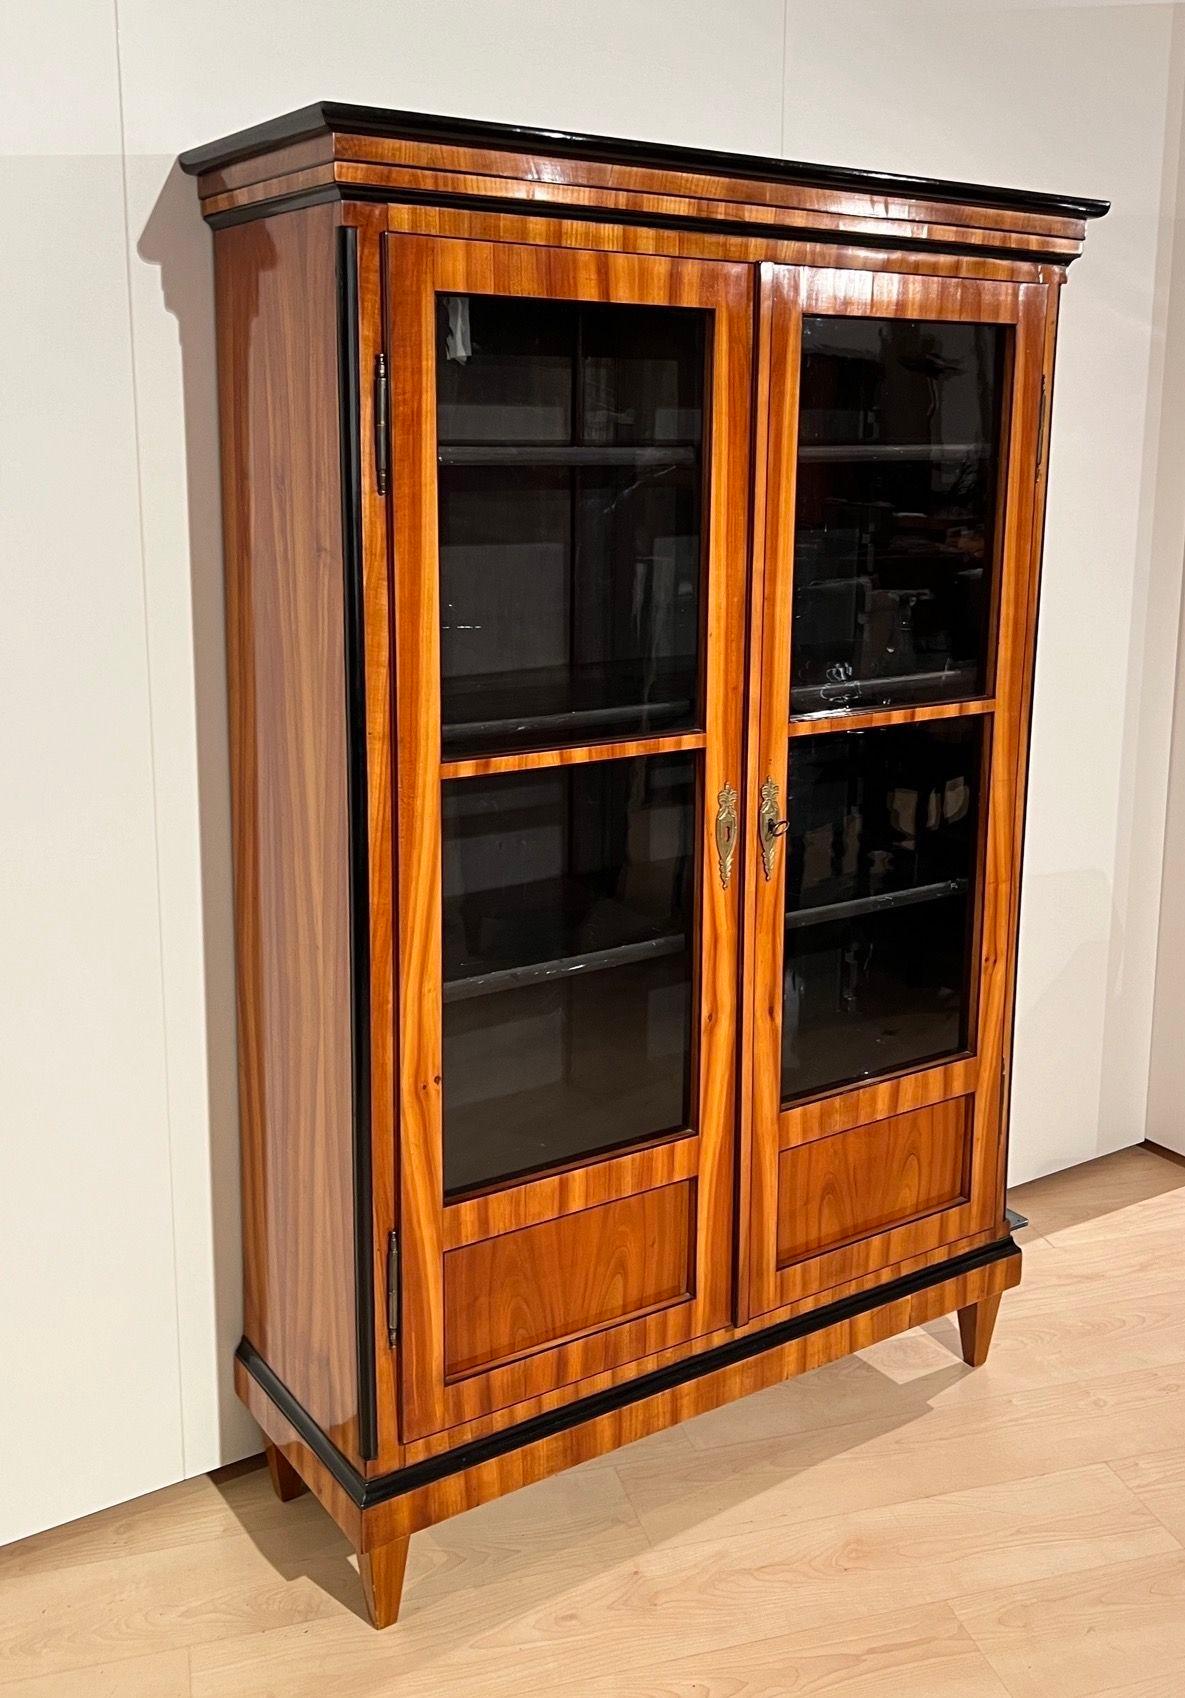 Elegant straight-lined Biedermeier Bookcase or Display Cabinet in cherry veneer from South Germany around 1820.

Cherrywood veneered on softwood. The edges of the doors and the strip between the doors are set in ebony.
Book-matched cherrywood veneer